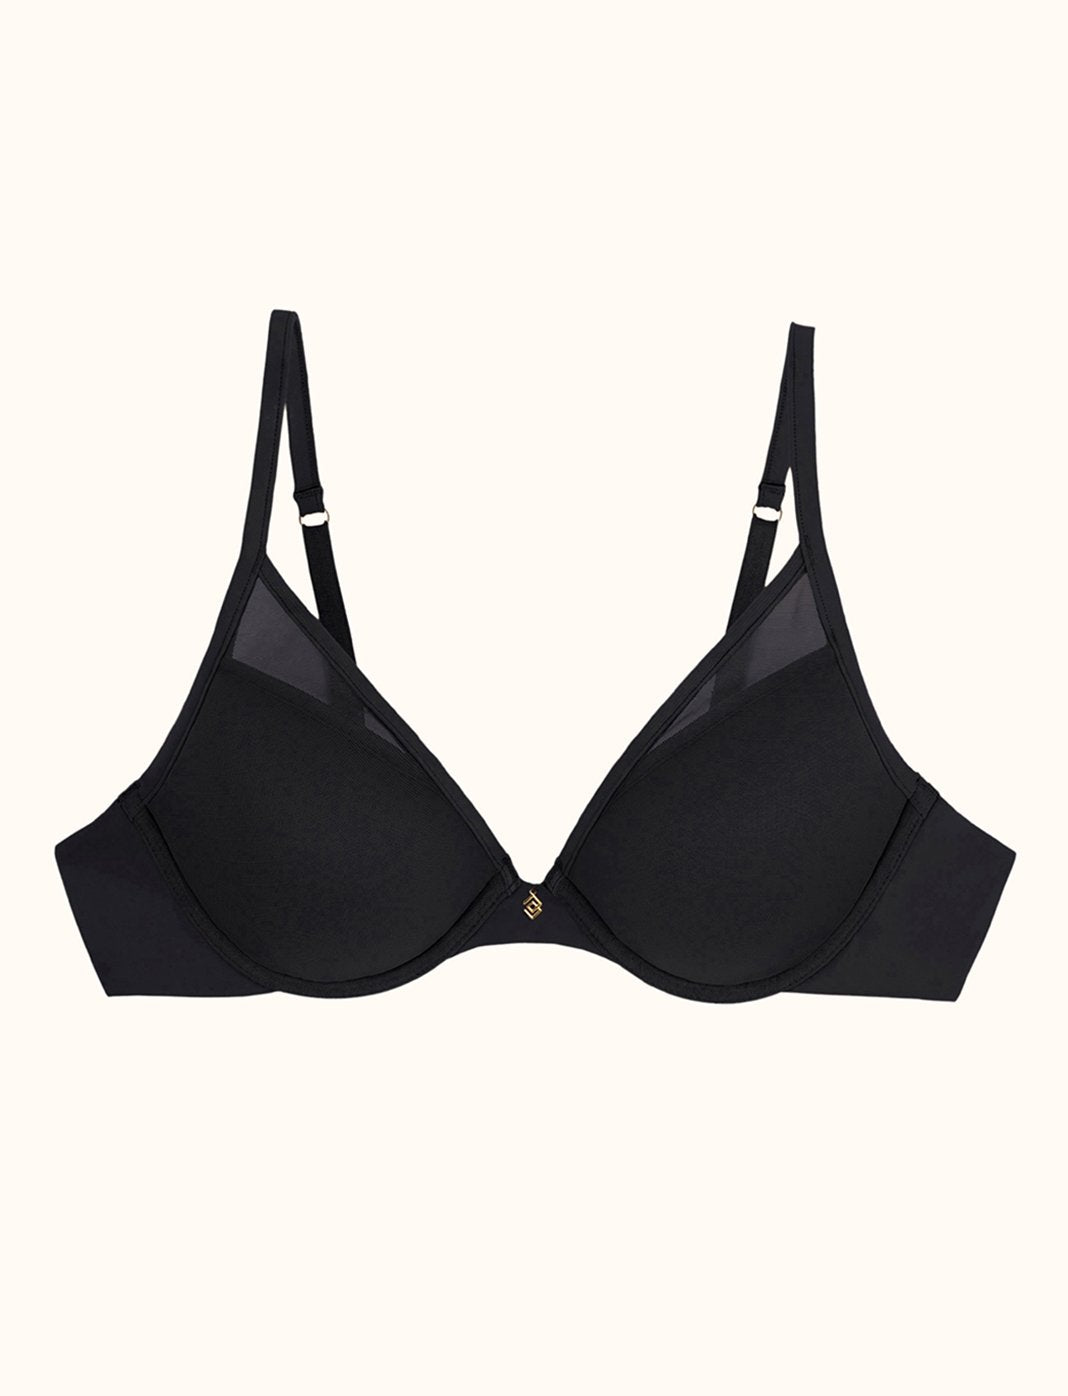 What Should I Do If My Bra Cups Are Too Roomy? - How To Tell If Your Bra Is Too  Big And How To Fix It - ThirdLove